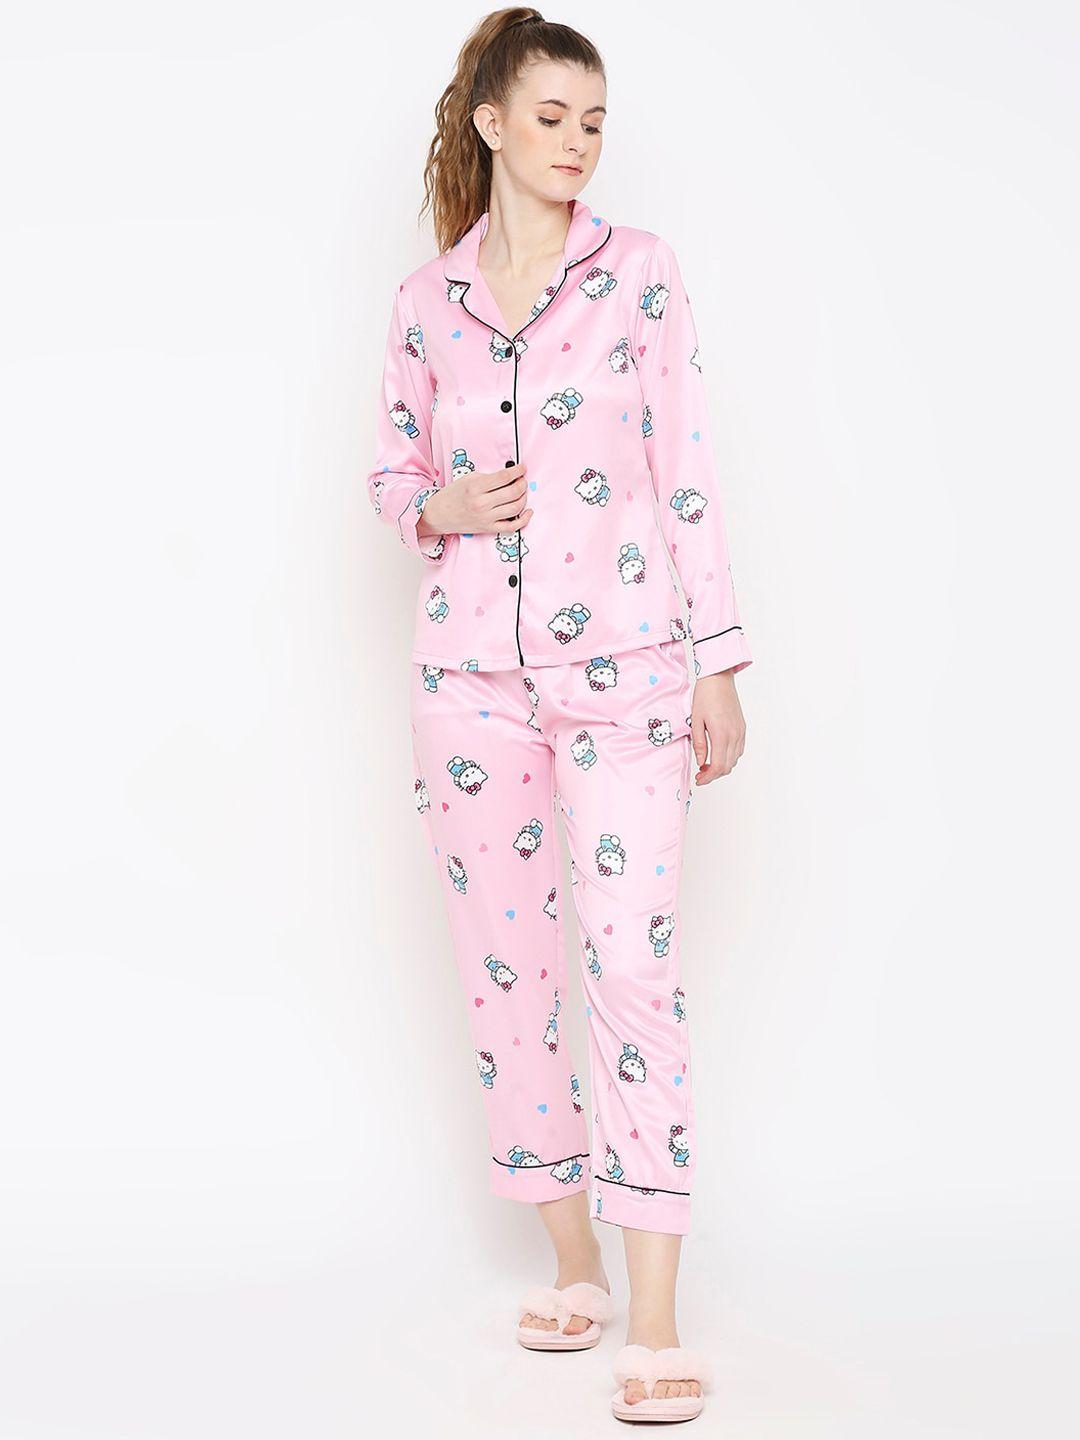 smarty pants women pink & blue printed night suit